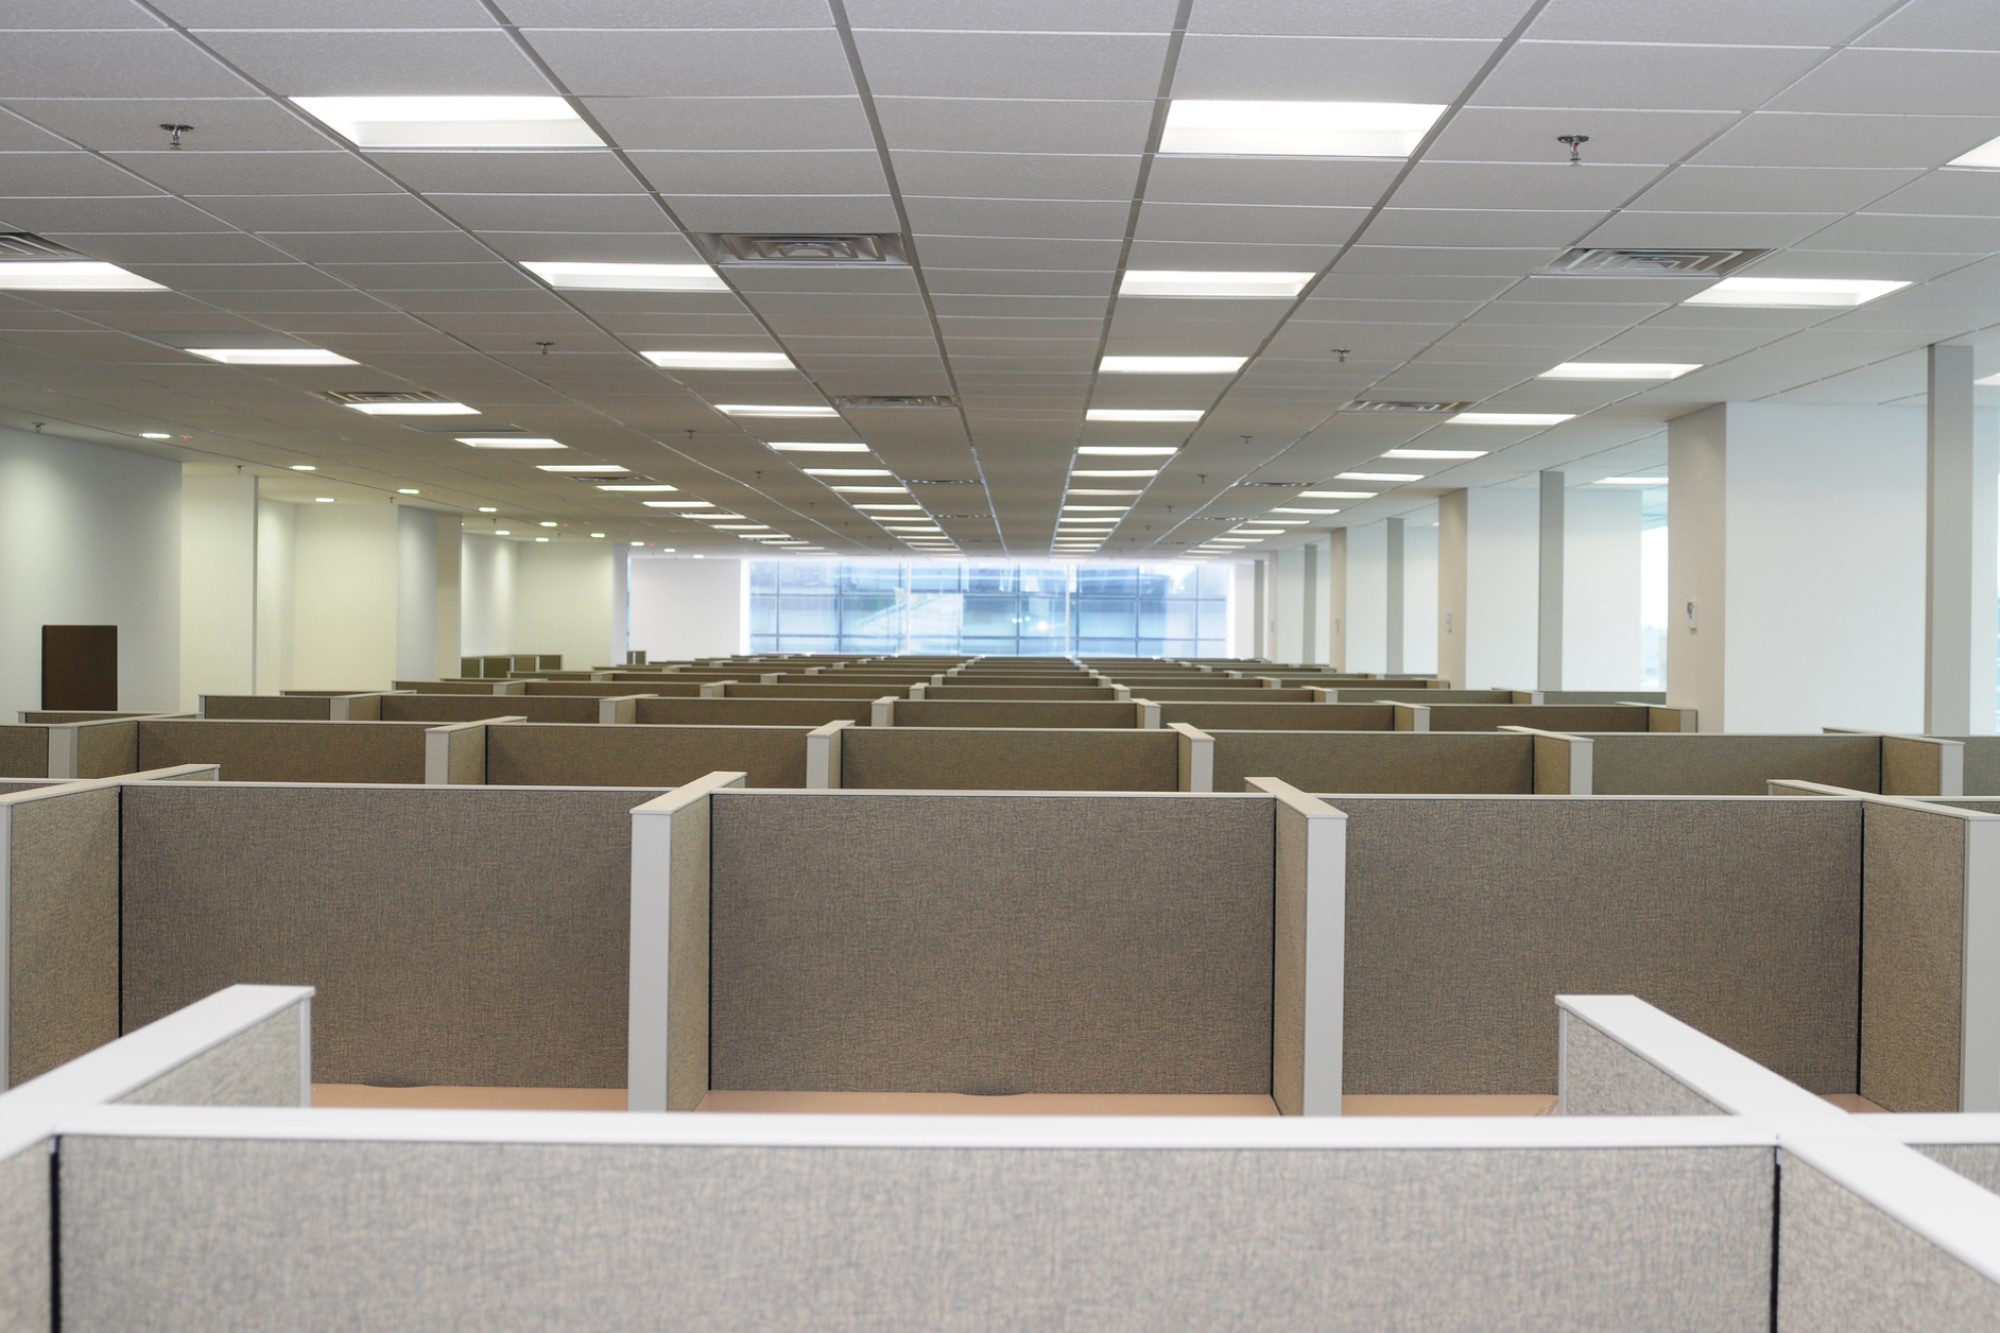 photograph of a maze of empty office cubicles